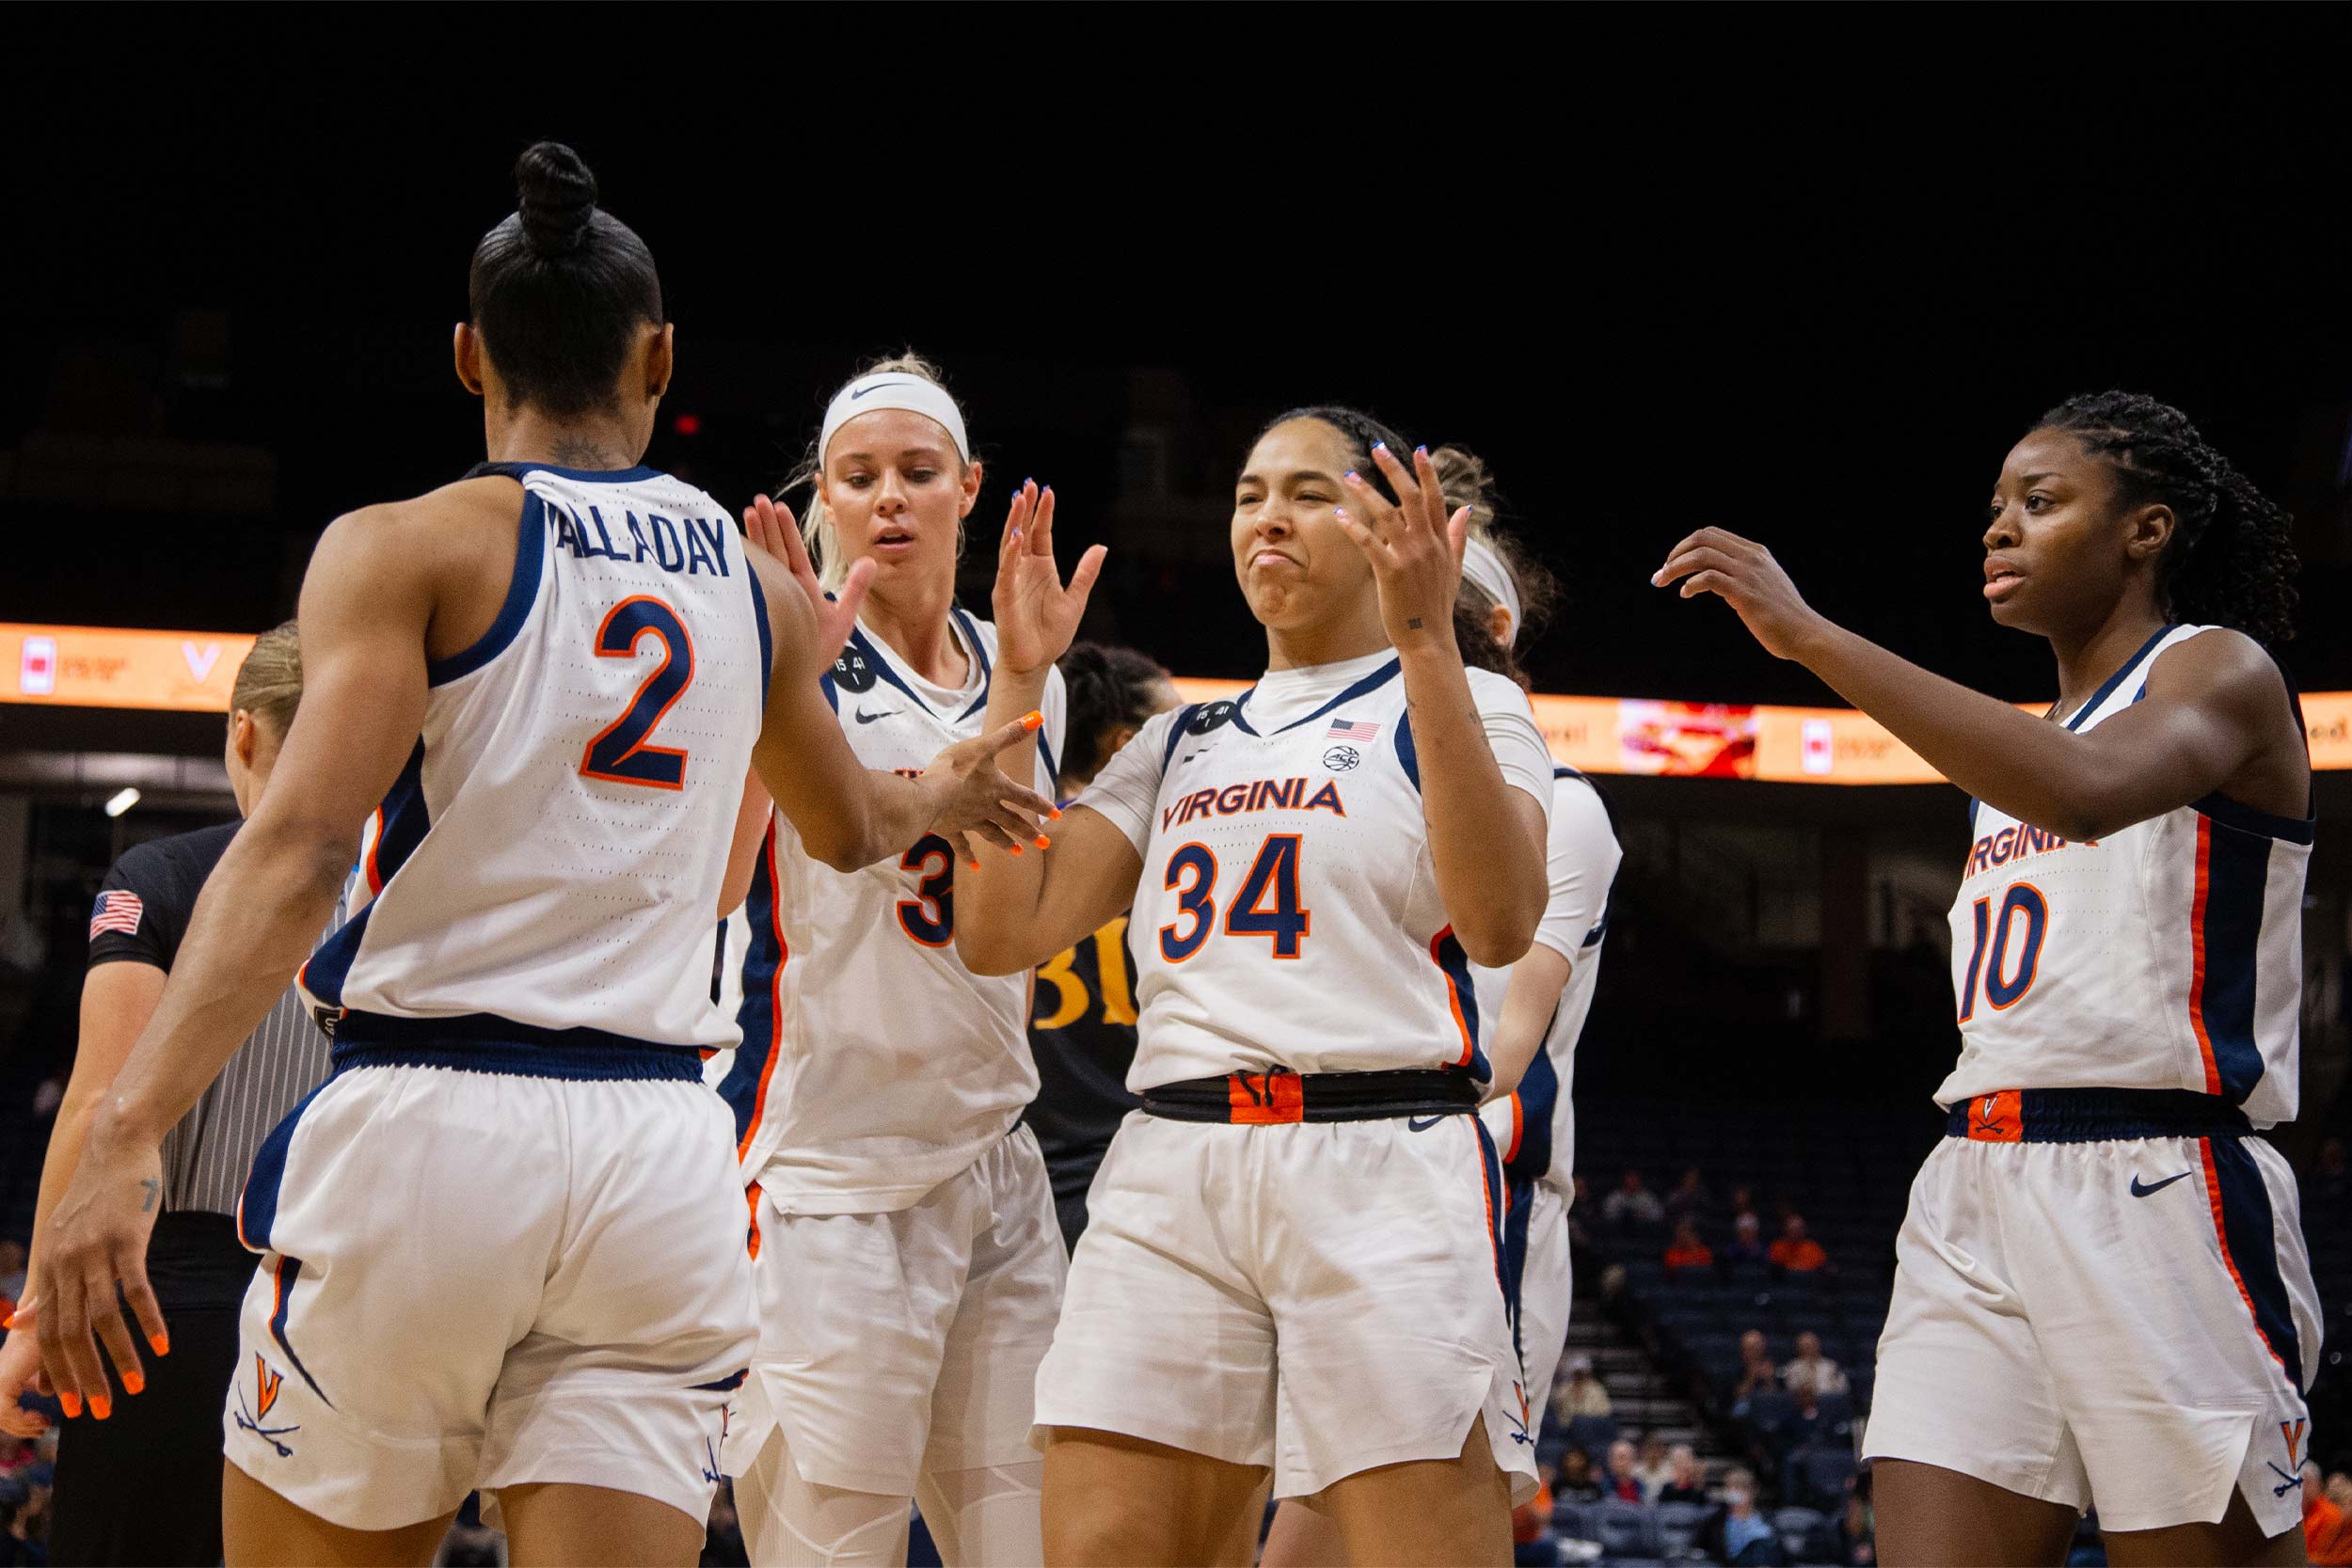 UVA womens basketball team giving high fives on the court